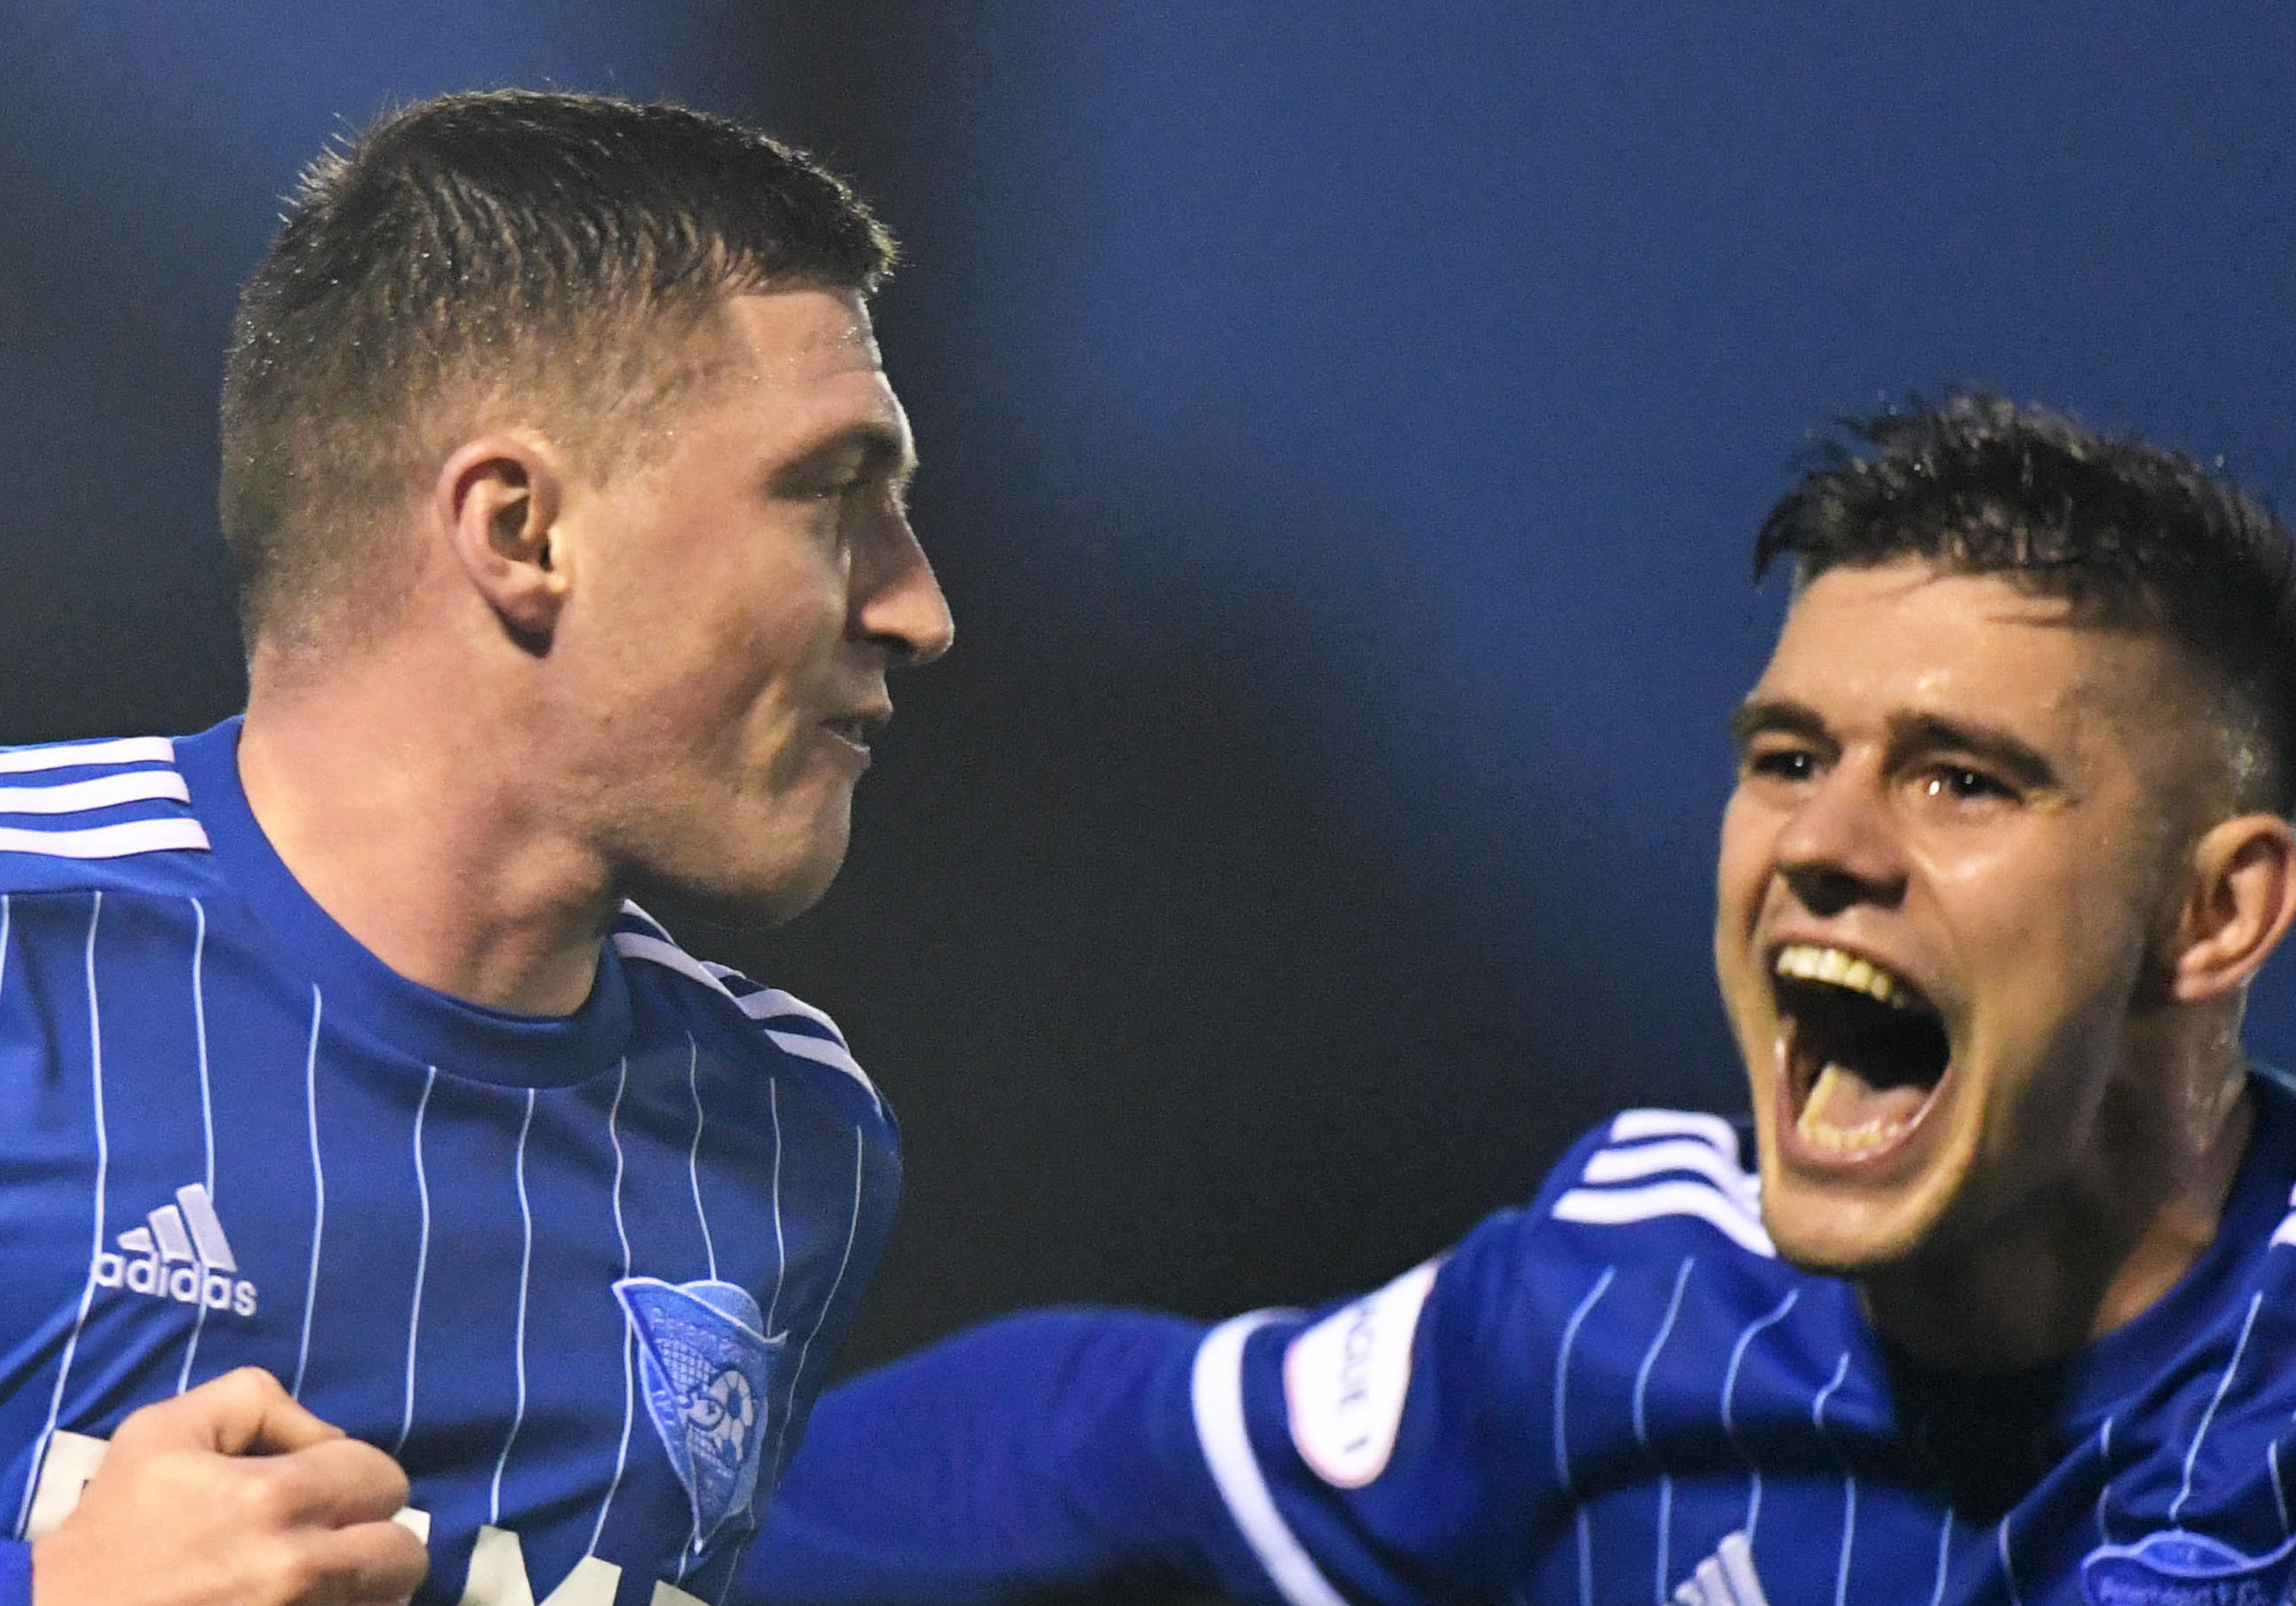 PETERHEAD'S GARY FRASER CELEBRATES HIS GOAL WITH JACK LEITCH